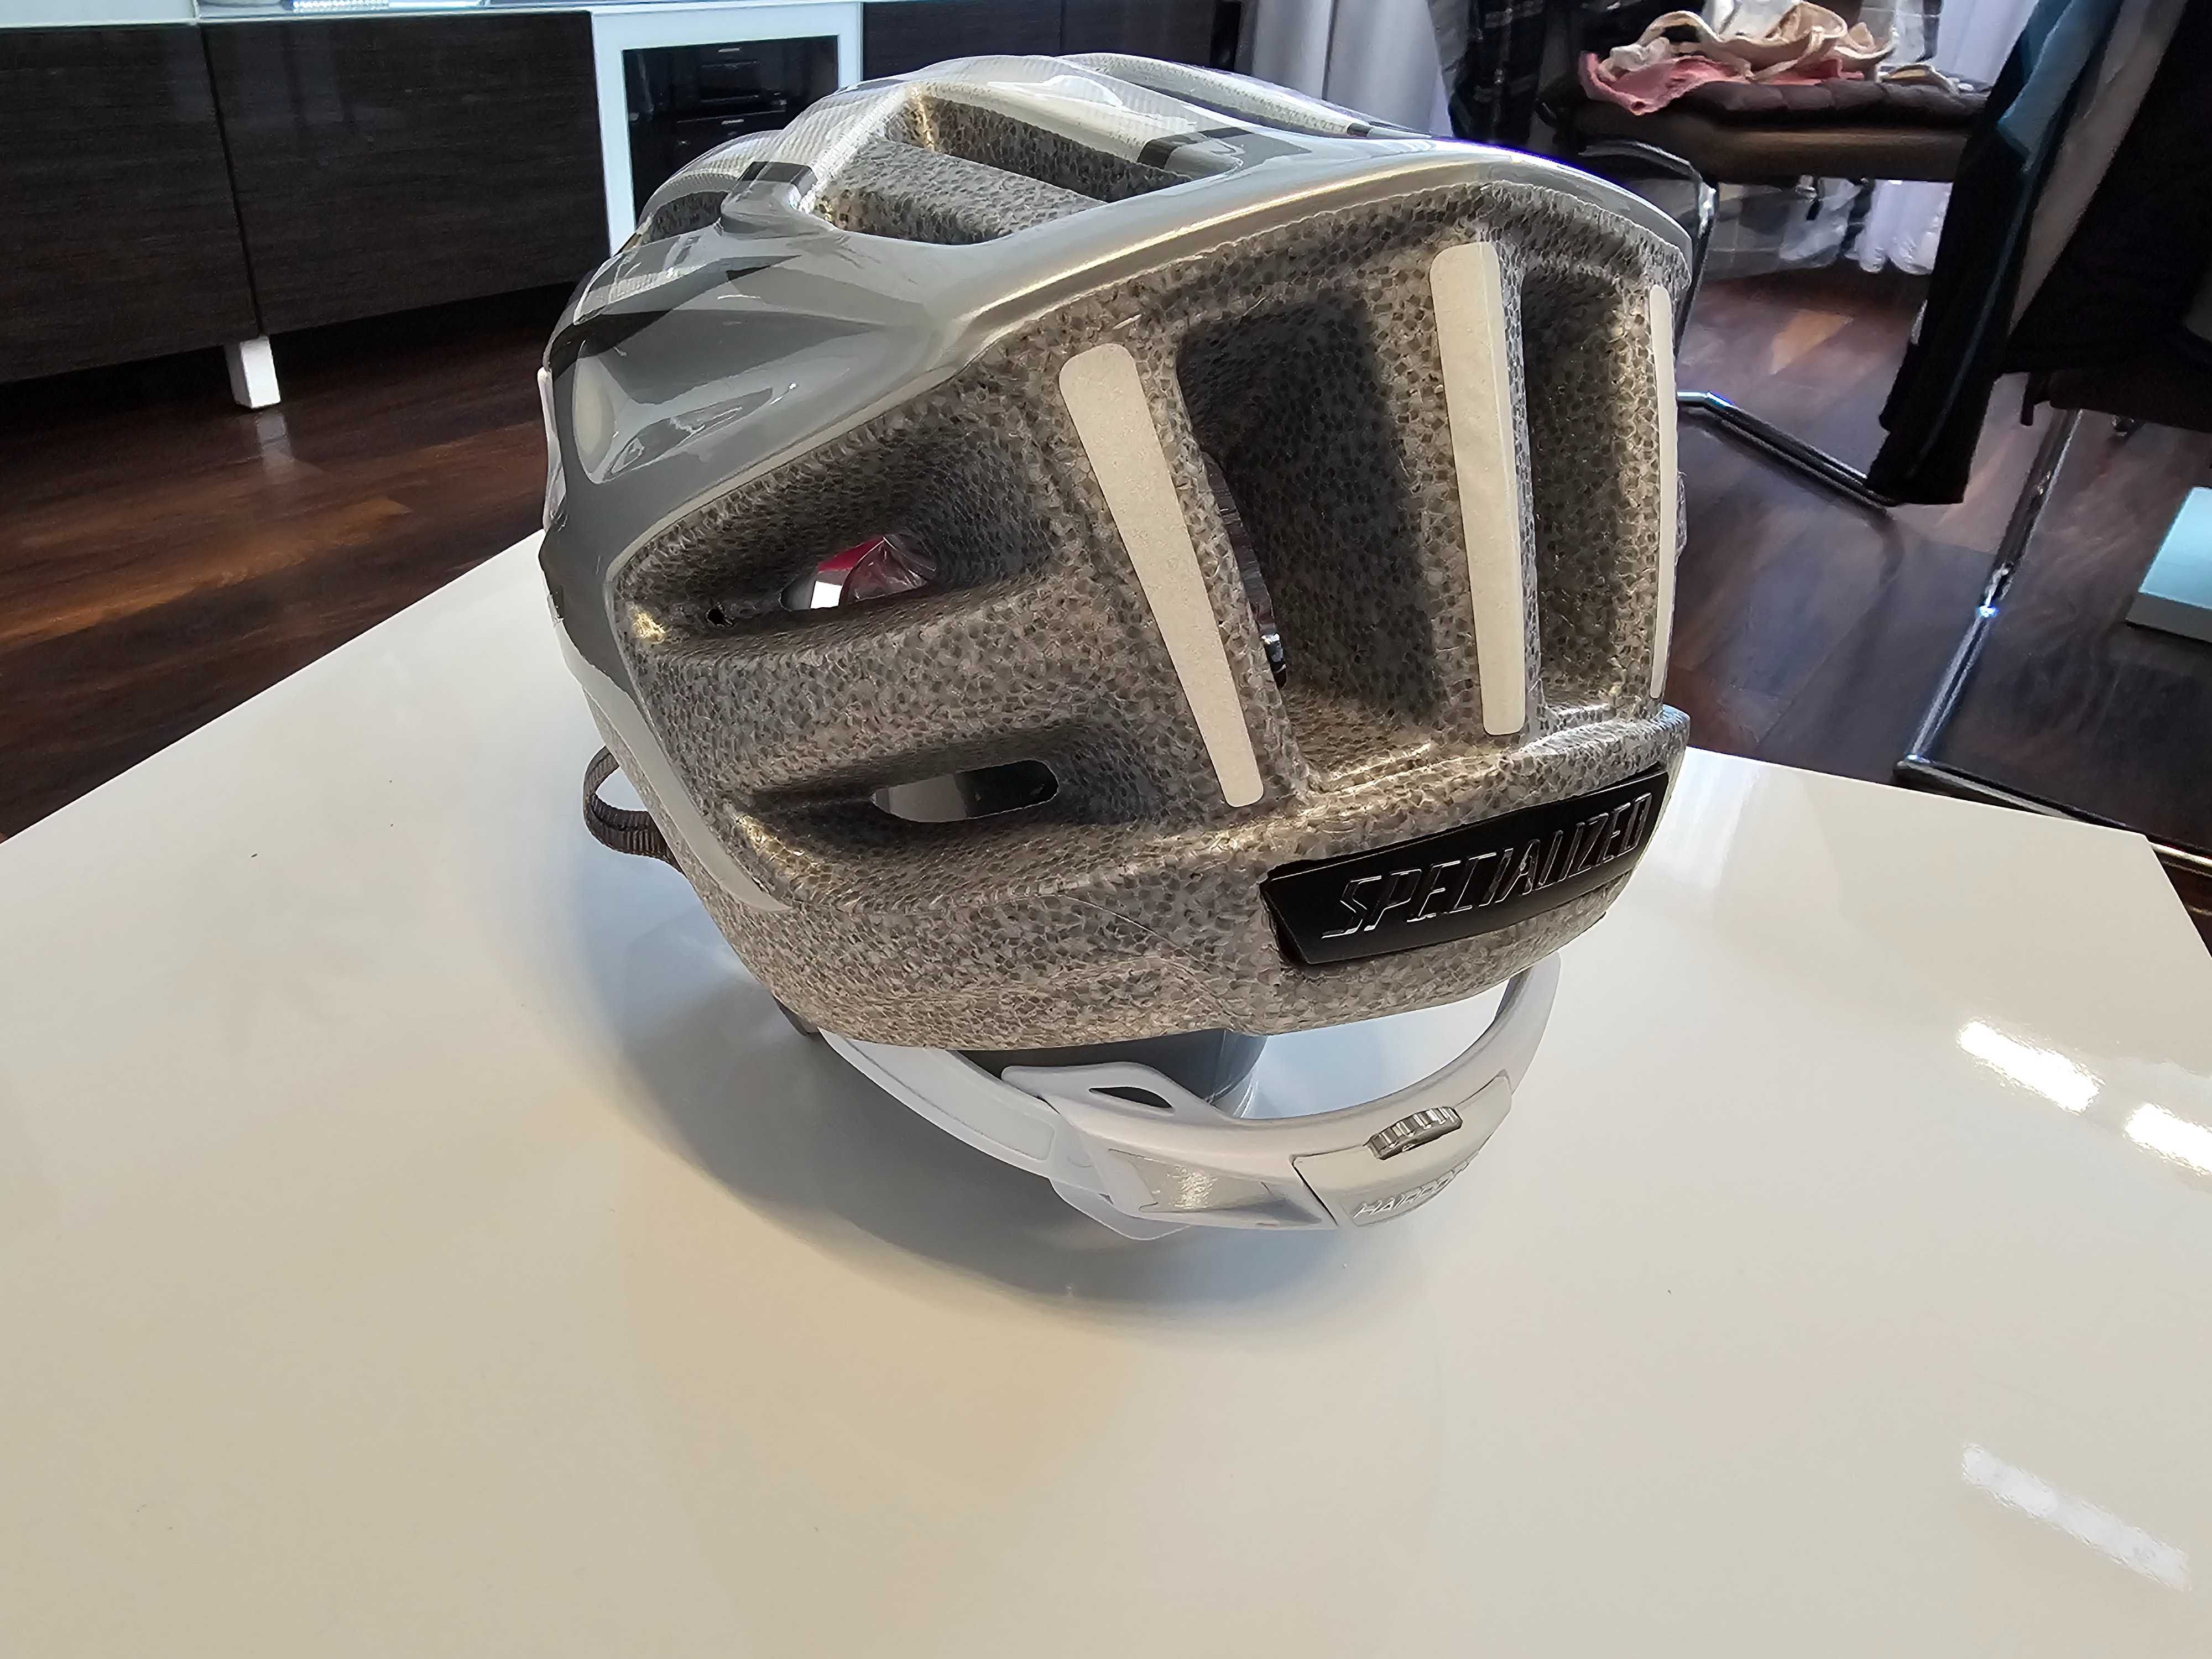 Kask na rower Specialized